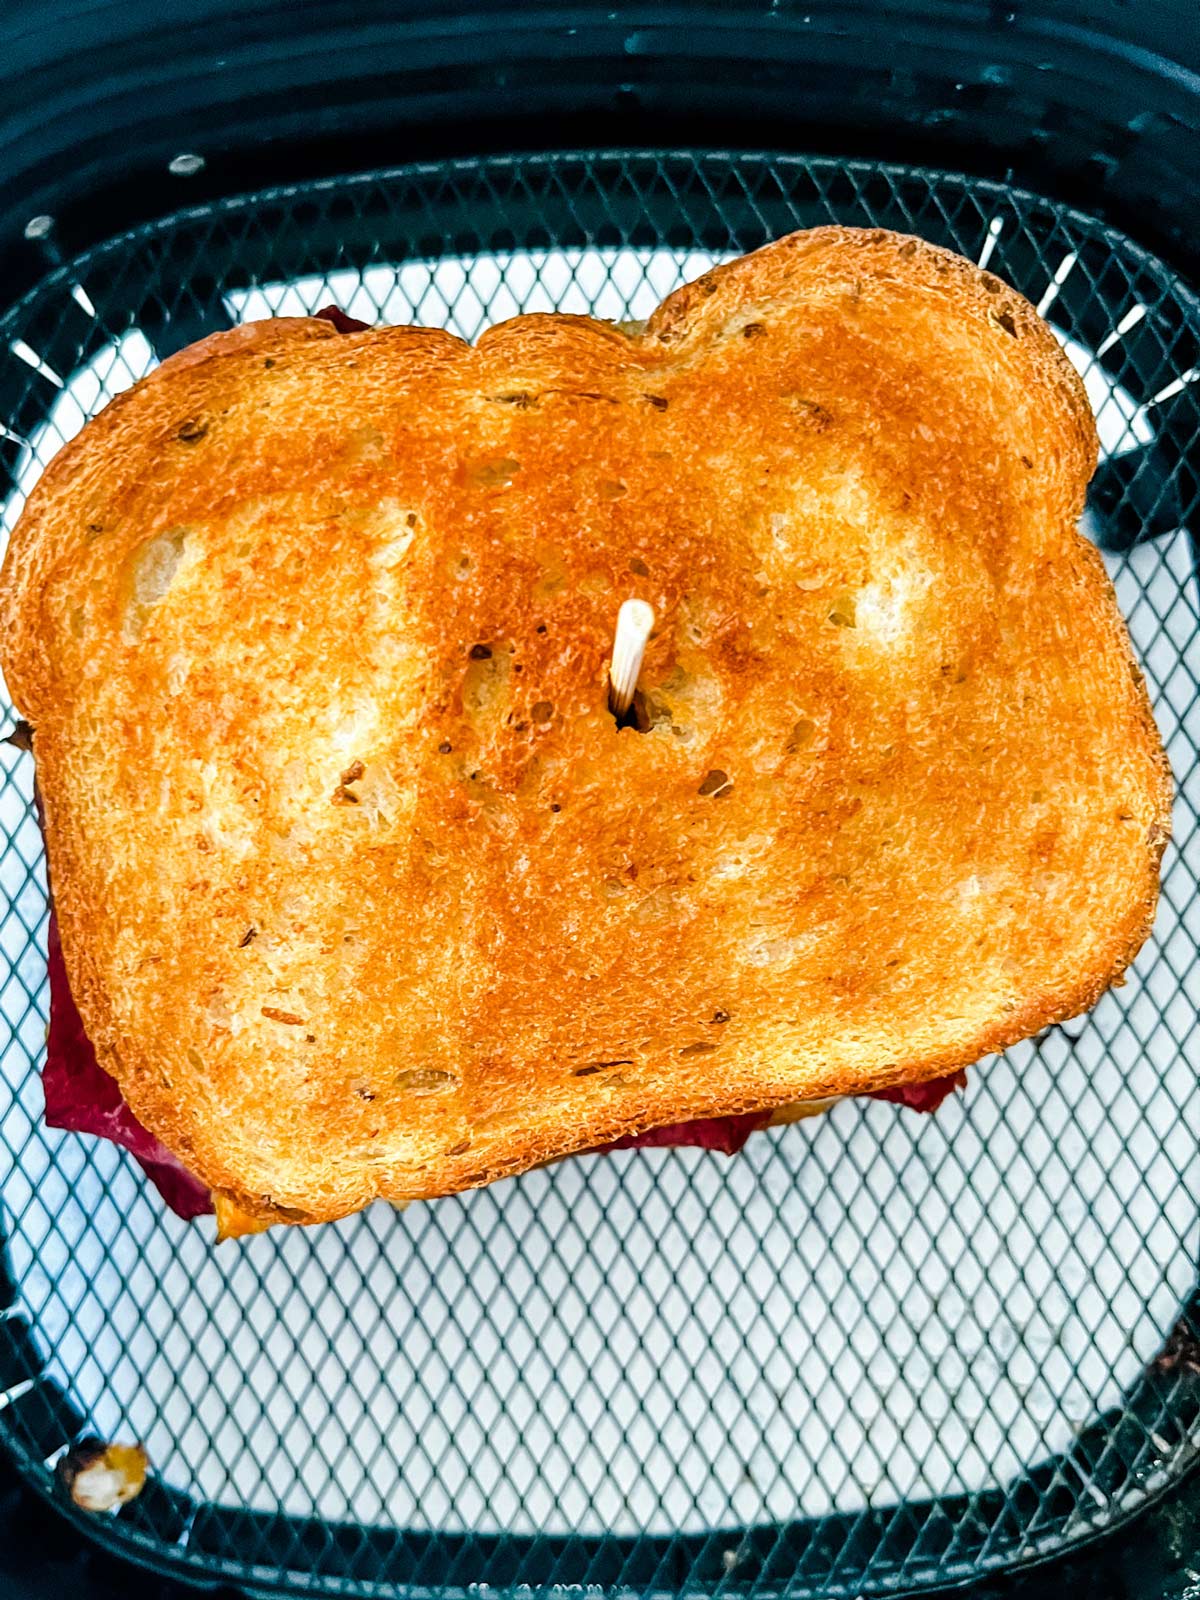 A crispy air fryer Reuben sandwich that is in an air fryer basket after just being cooked.